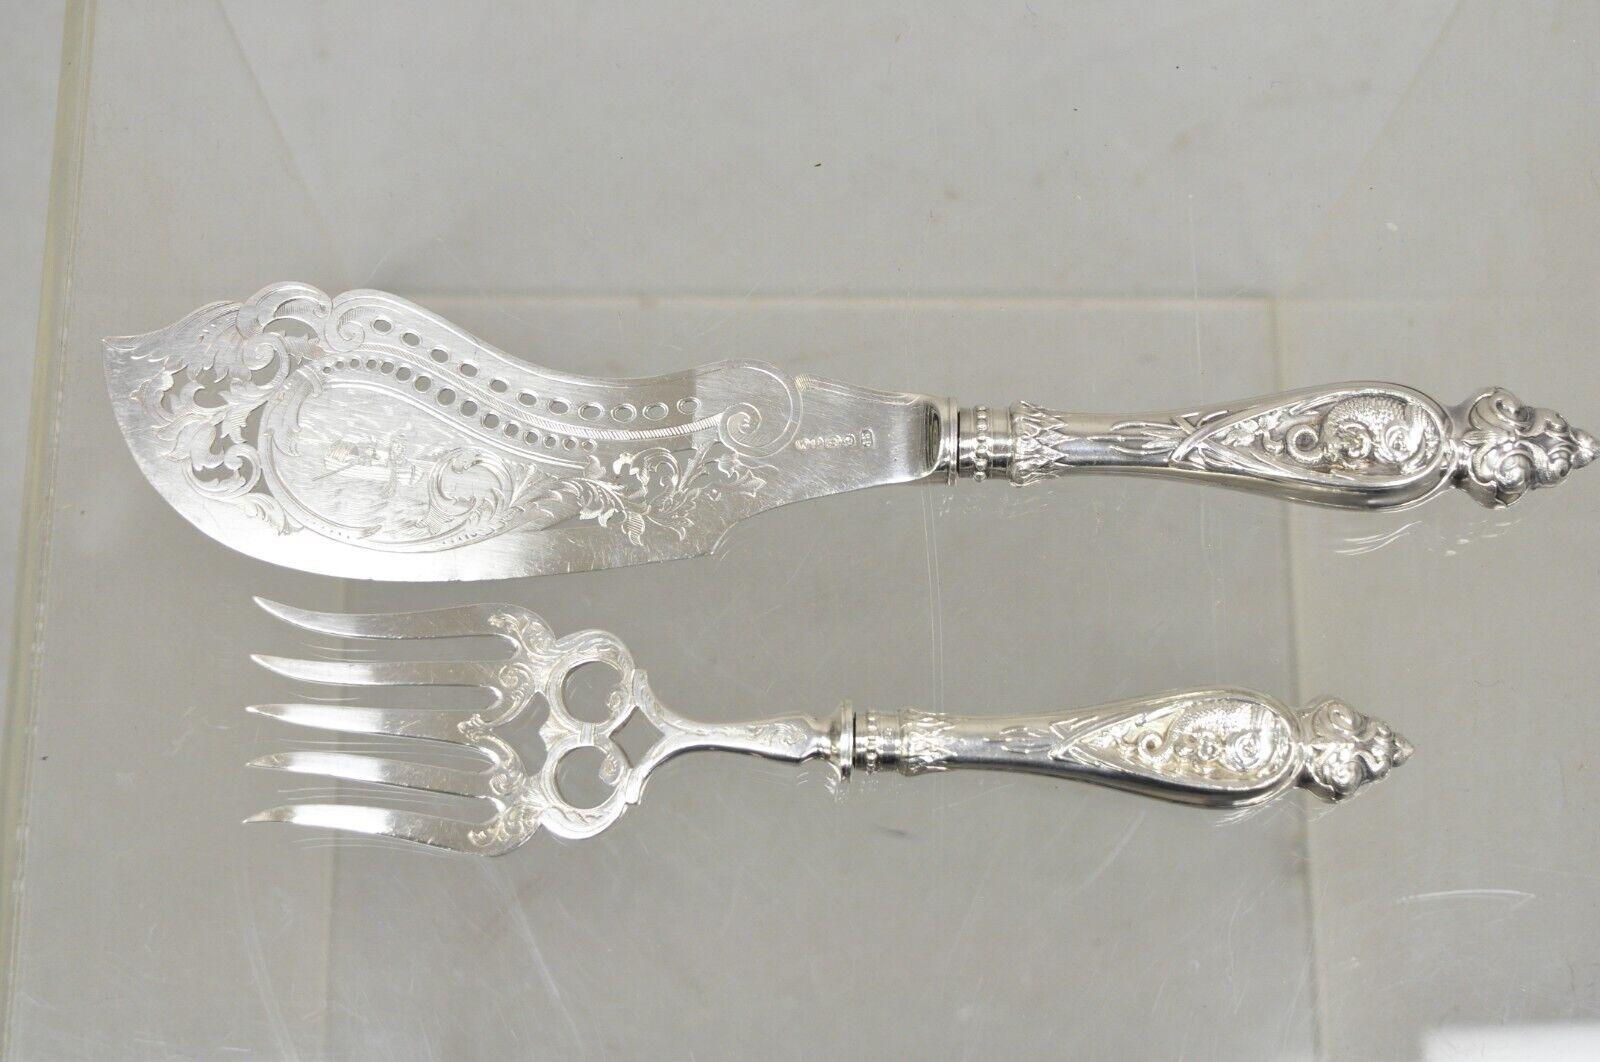 Antique English Victorian Silver Plated Figural Fish Service Fork Knife Set. Item features Cherub and dolphin design to handles, pierced and decorated knife, original hallmark which reads 